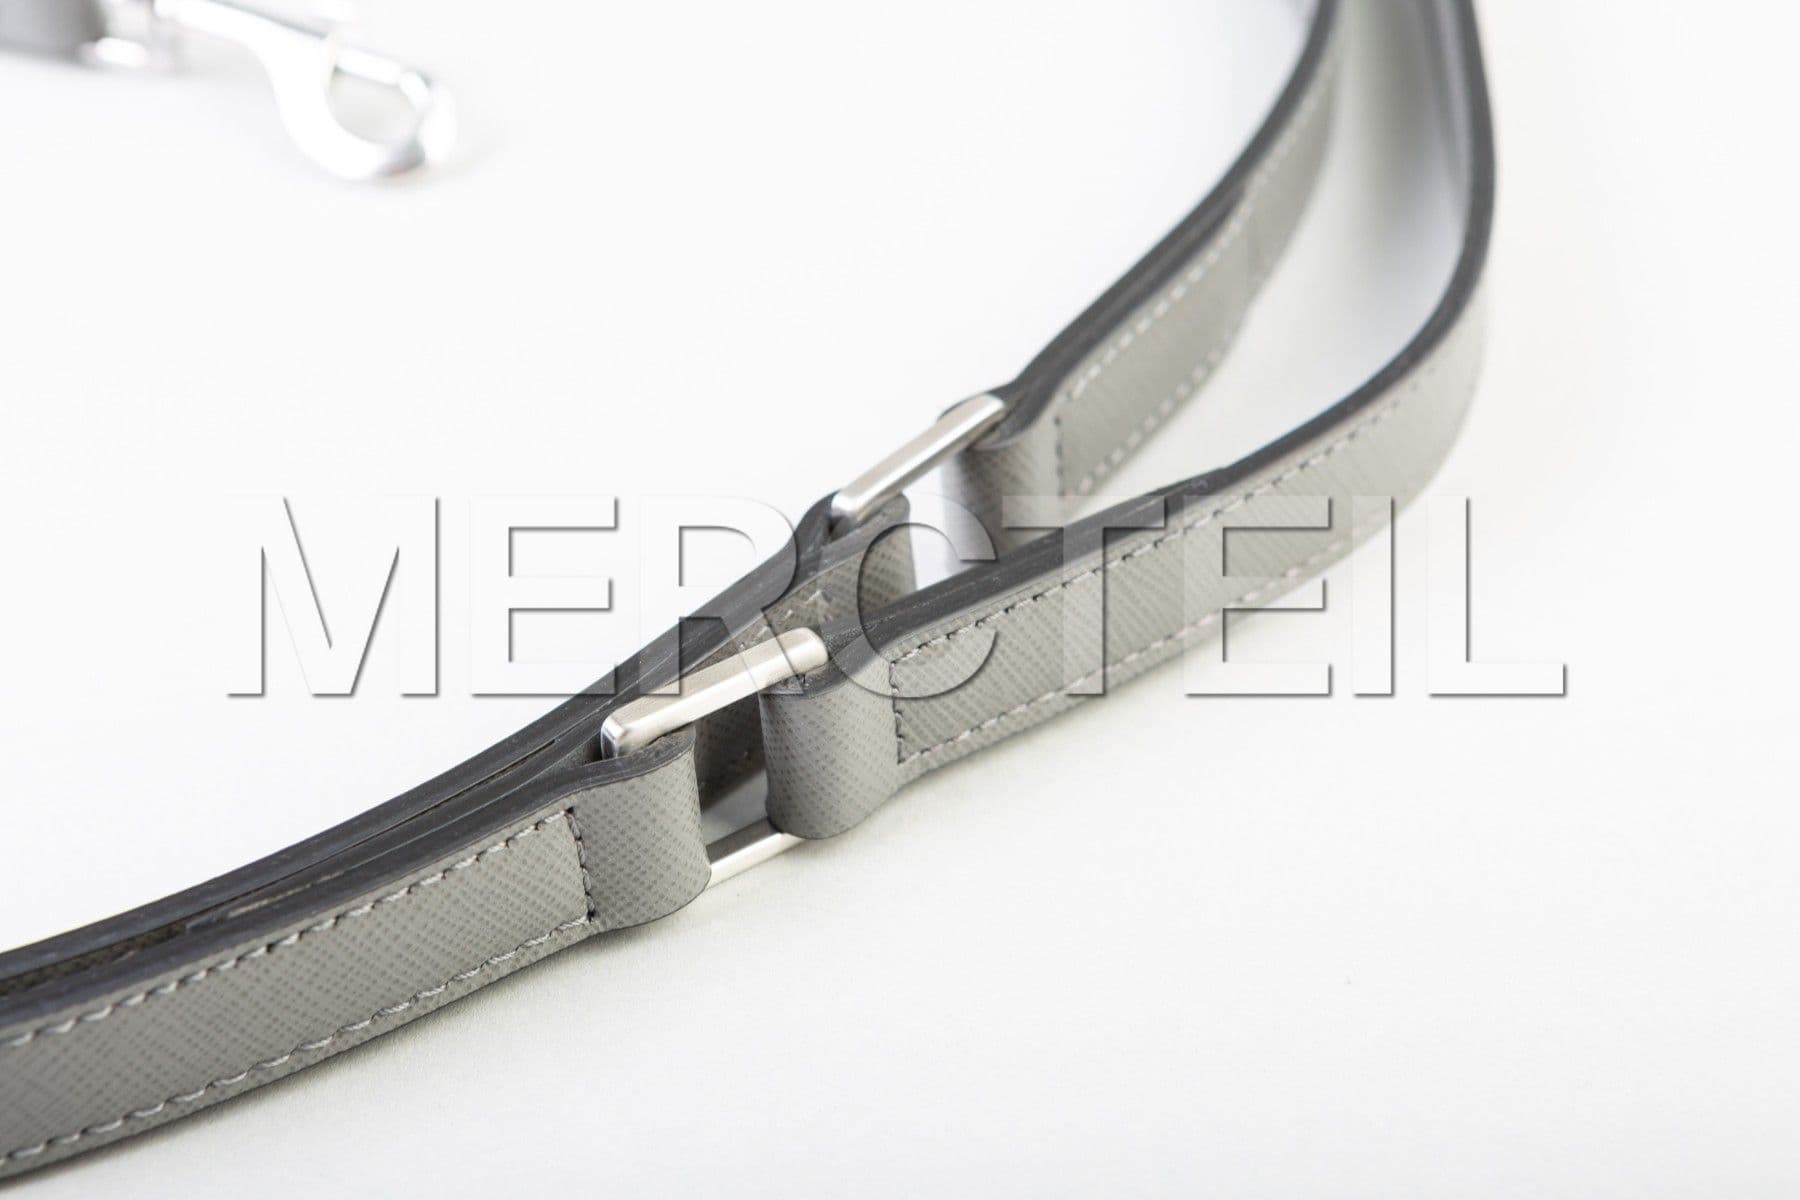 MiaCara Dog Leash Genuine MiaCara for Mercedes Benz Collection (part number: B66958836)